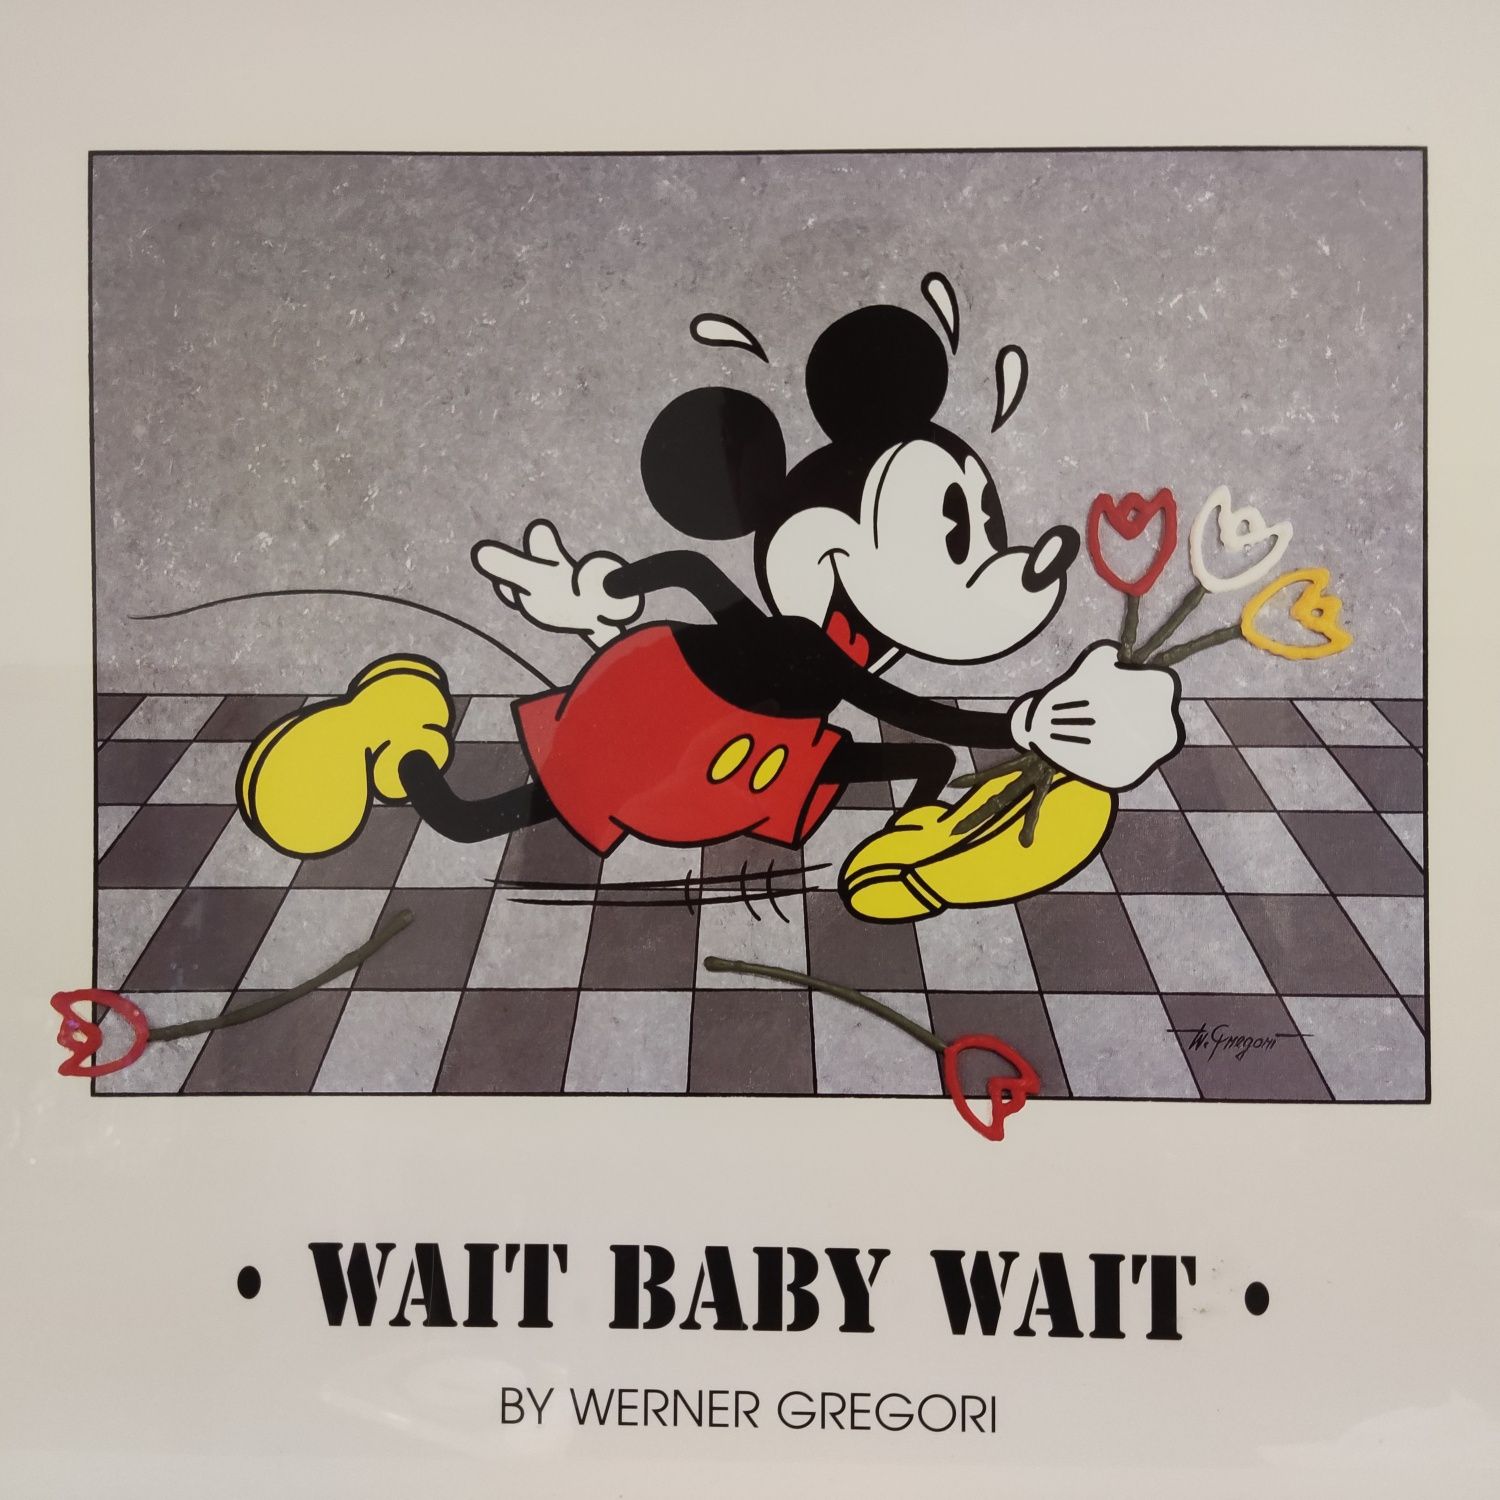 Mickey Mouse - "Wati Baby Wait by Werner Gregori" Quadro vintage